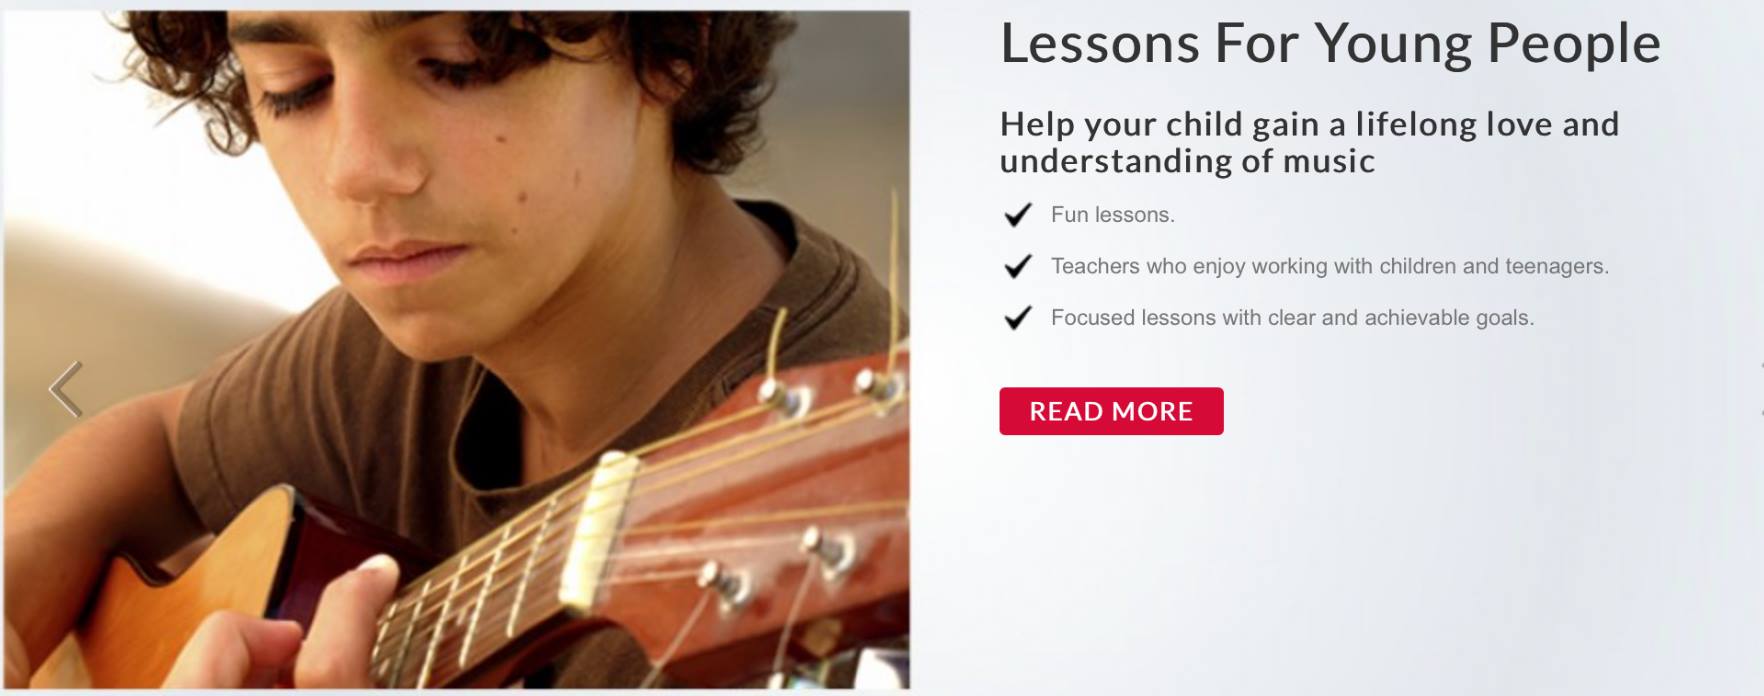 Guitar Lessons in Earlsfield Music Lessons and Music Teachers in Earlsfield